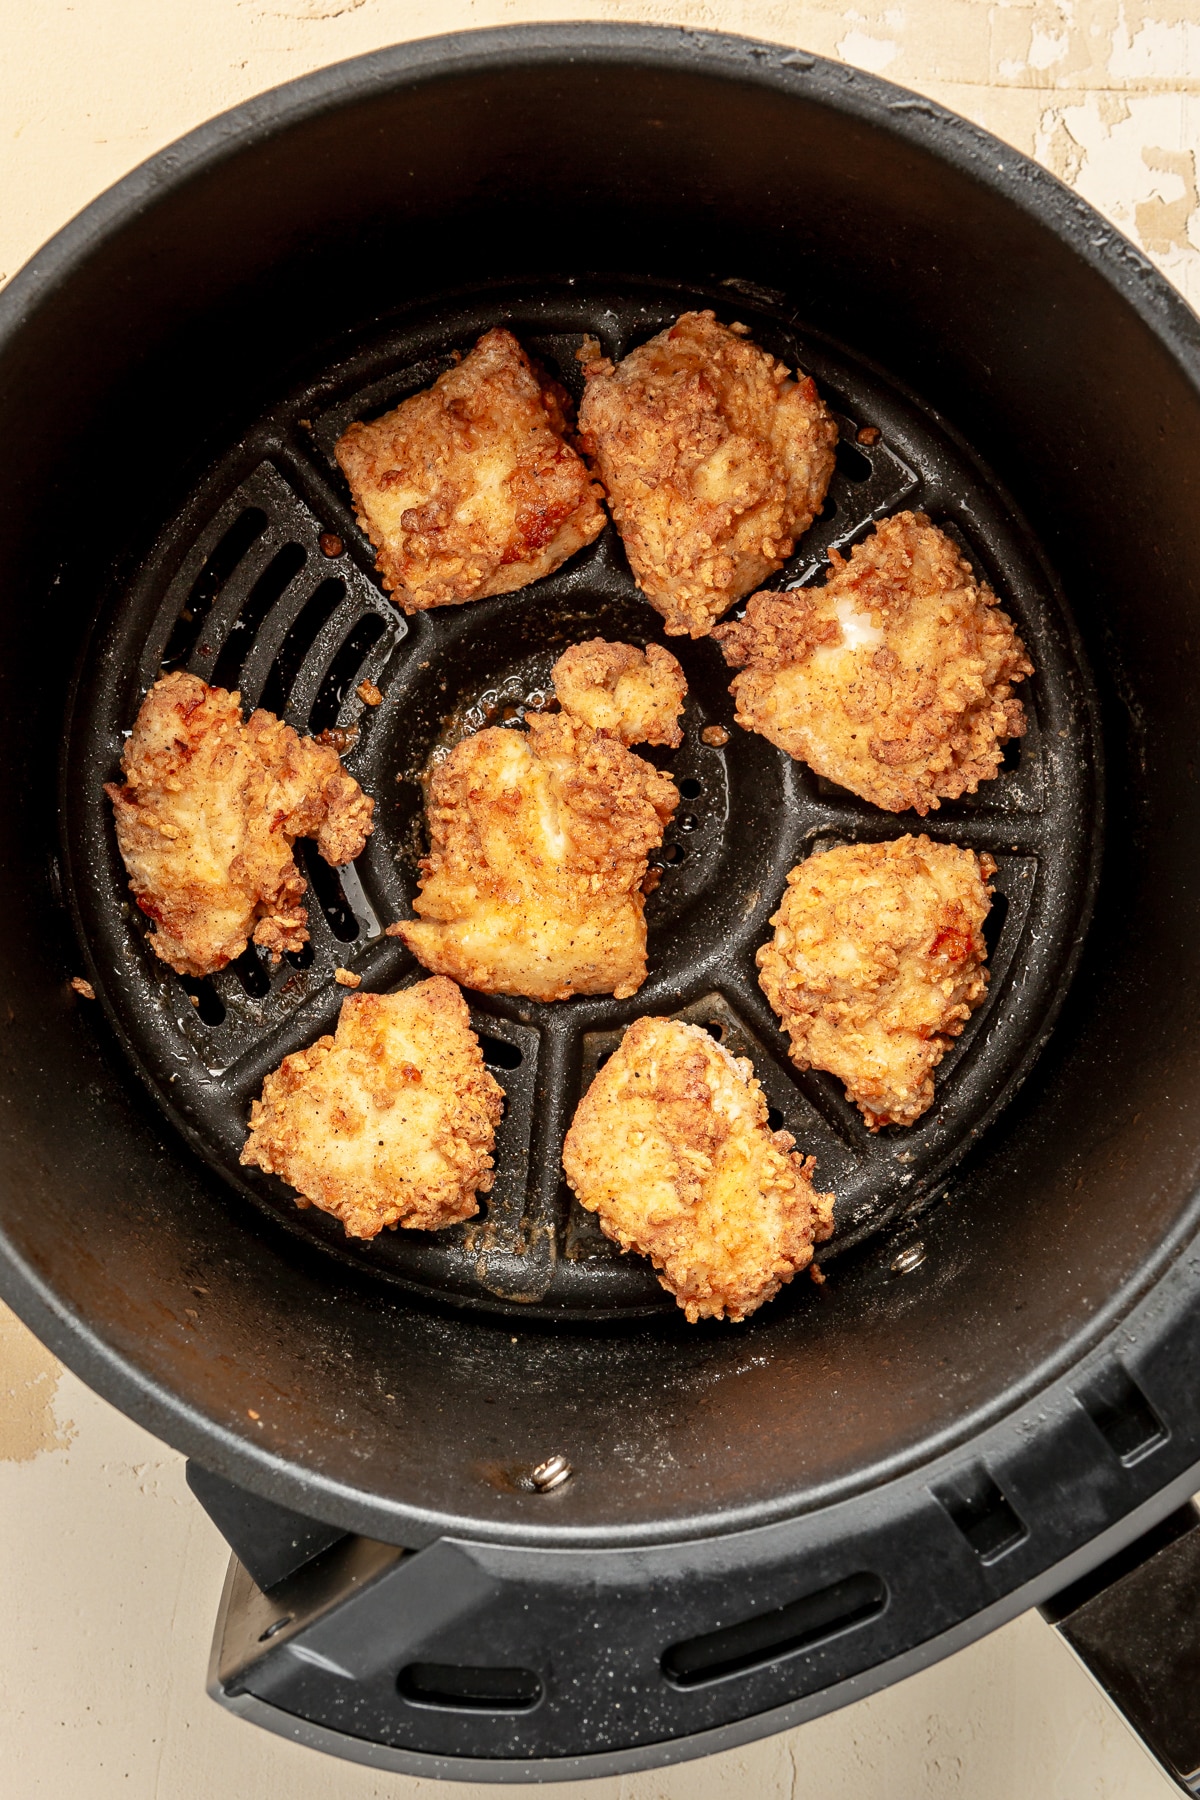 Fully cooked and breaded chicken pieces sit in an air fryer.